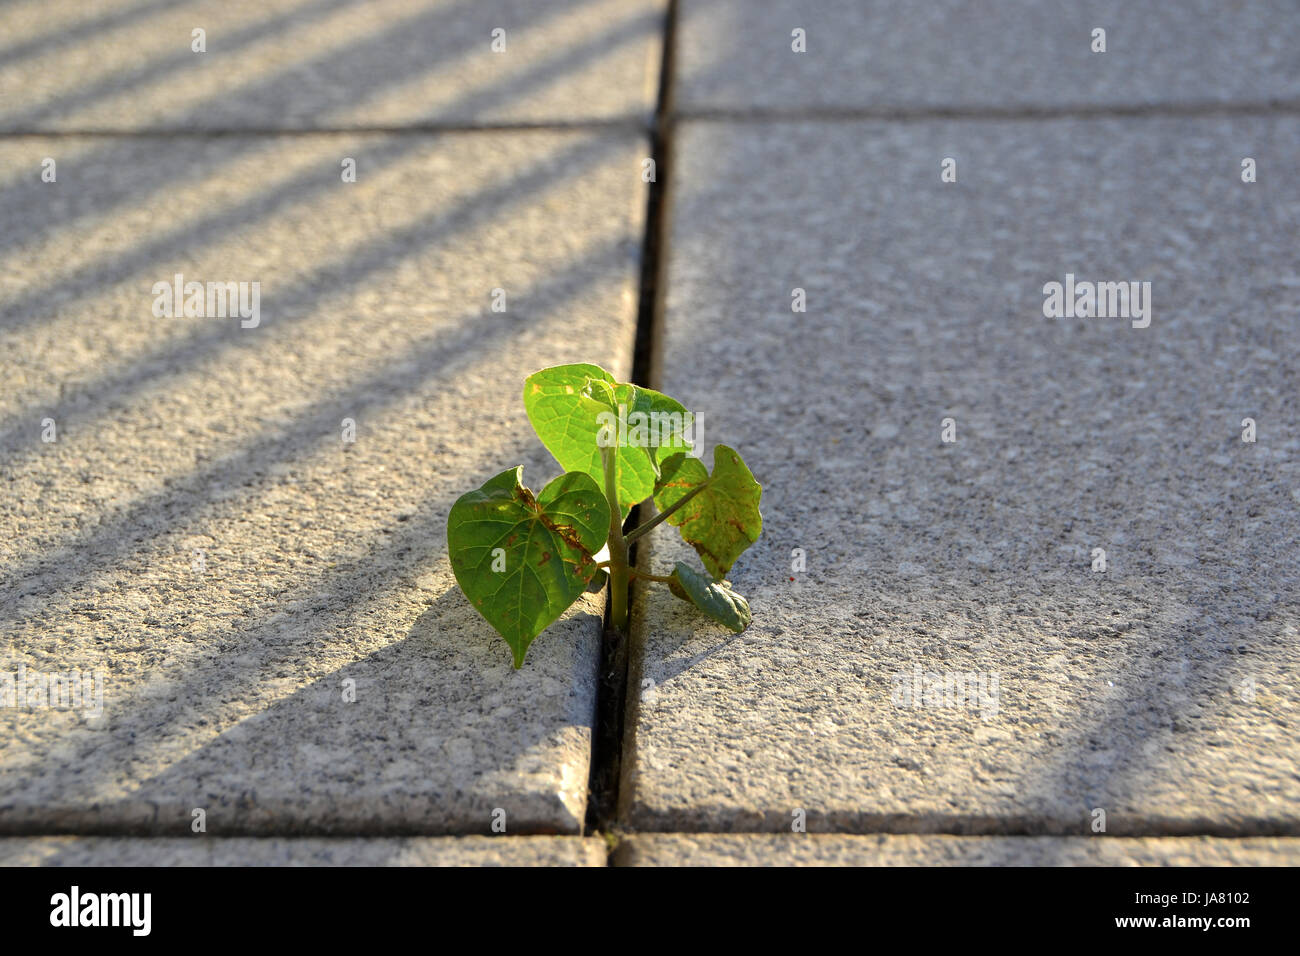 struggle for survival of a plant between paving slabs Stock Photo